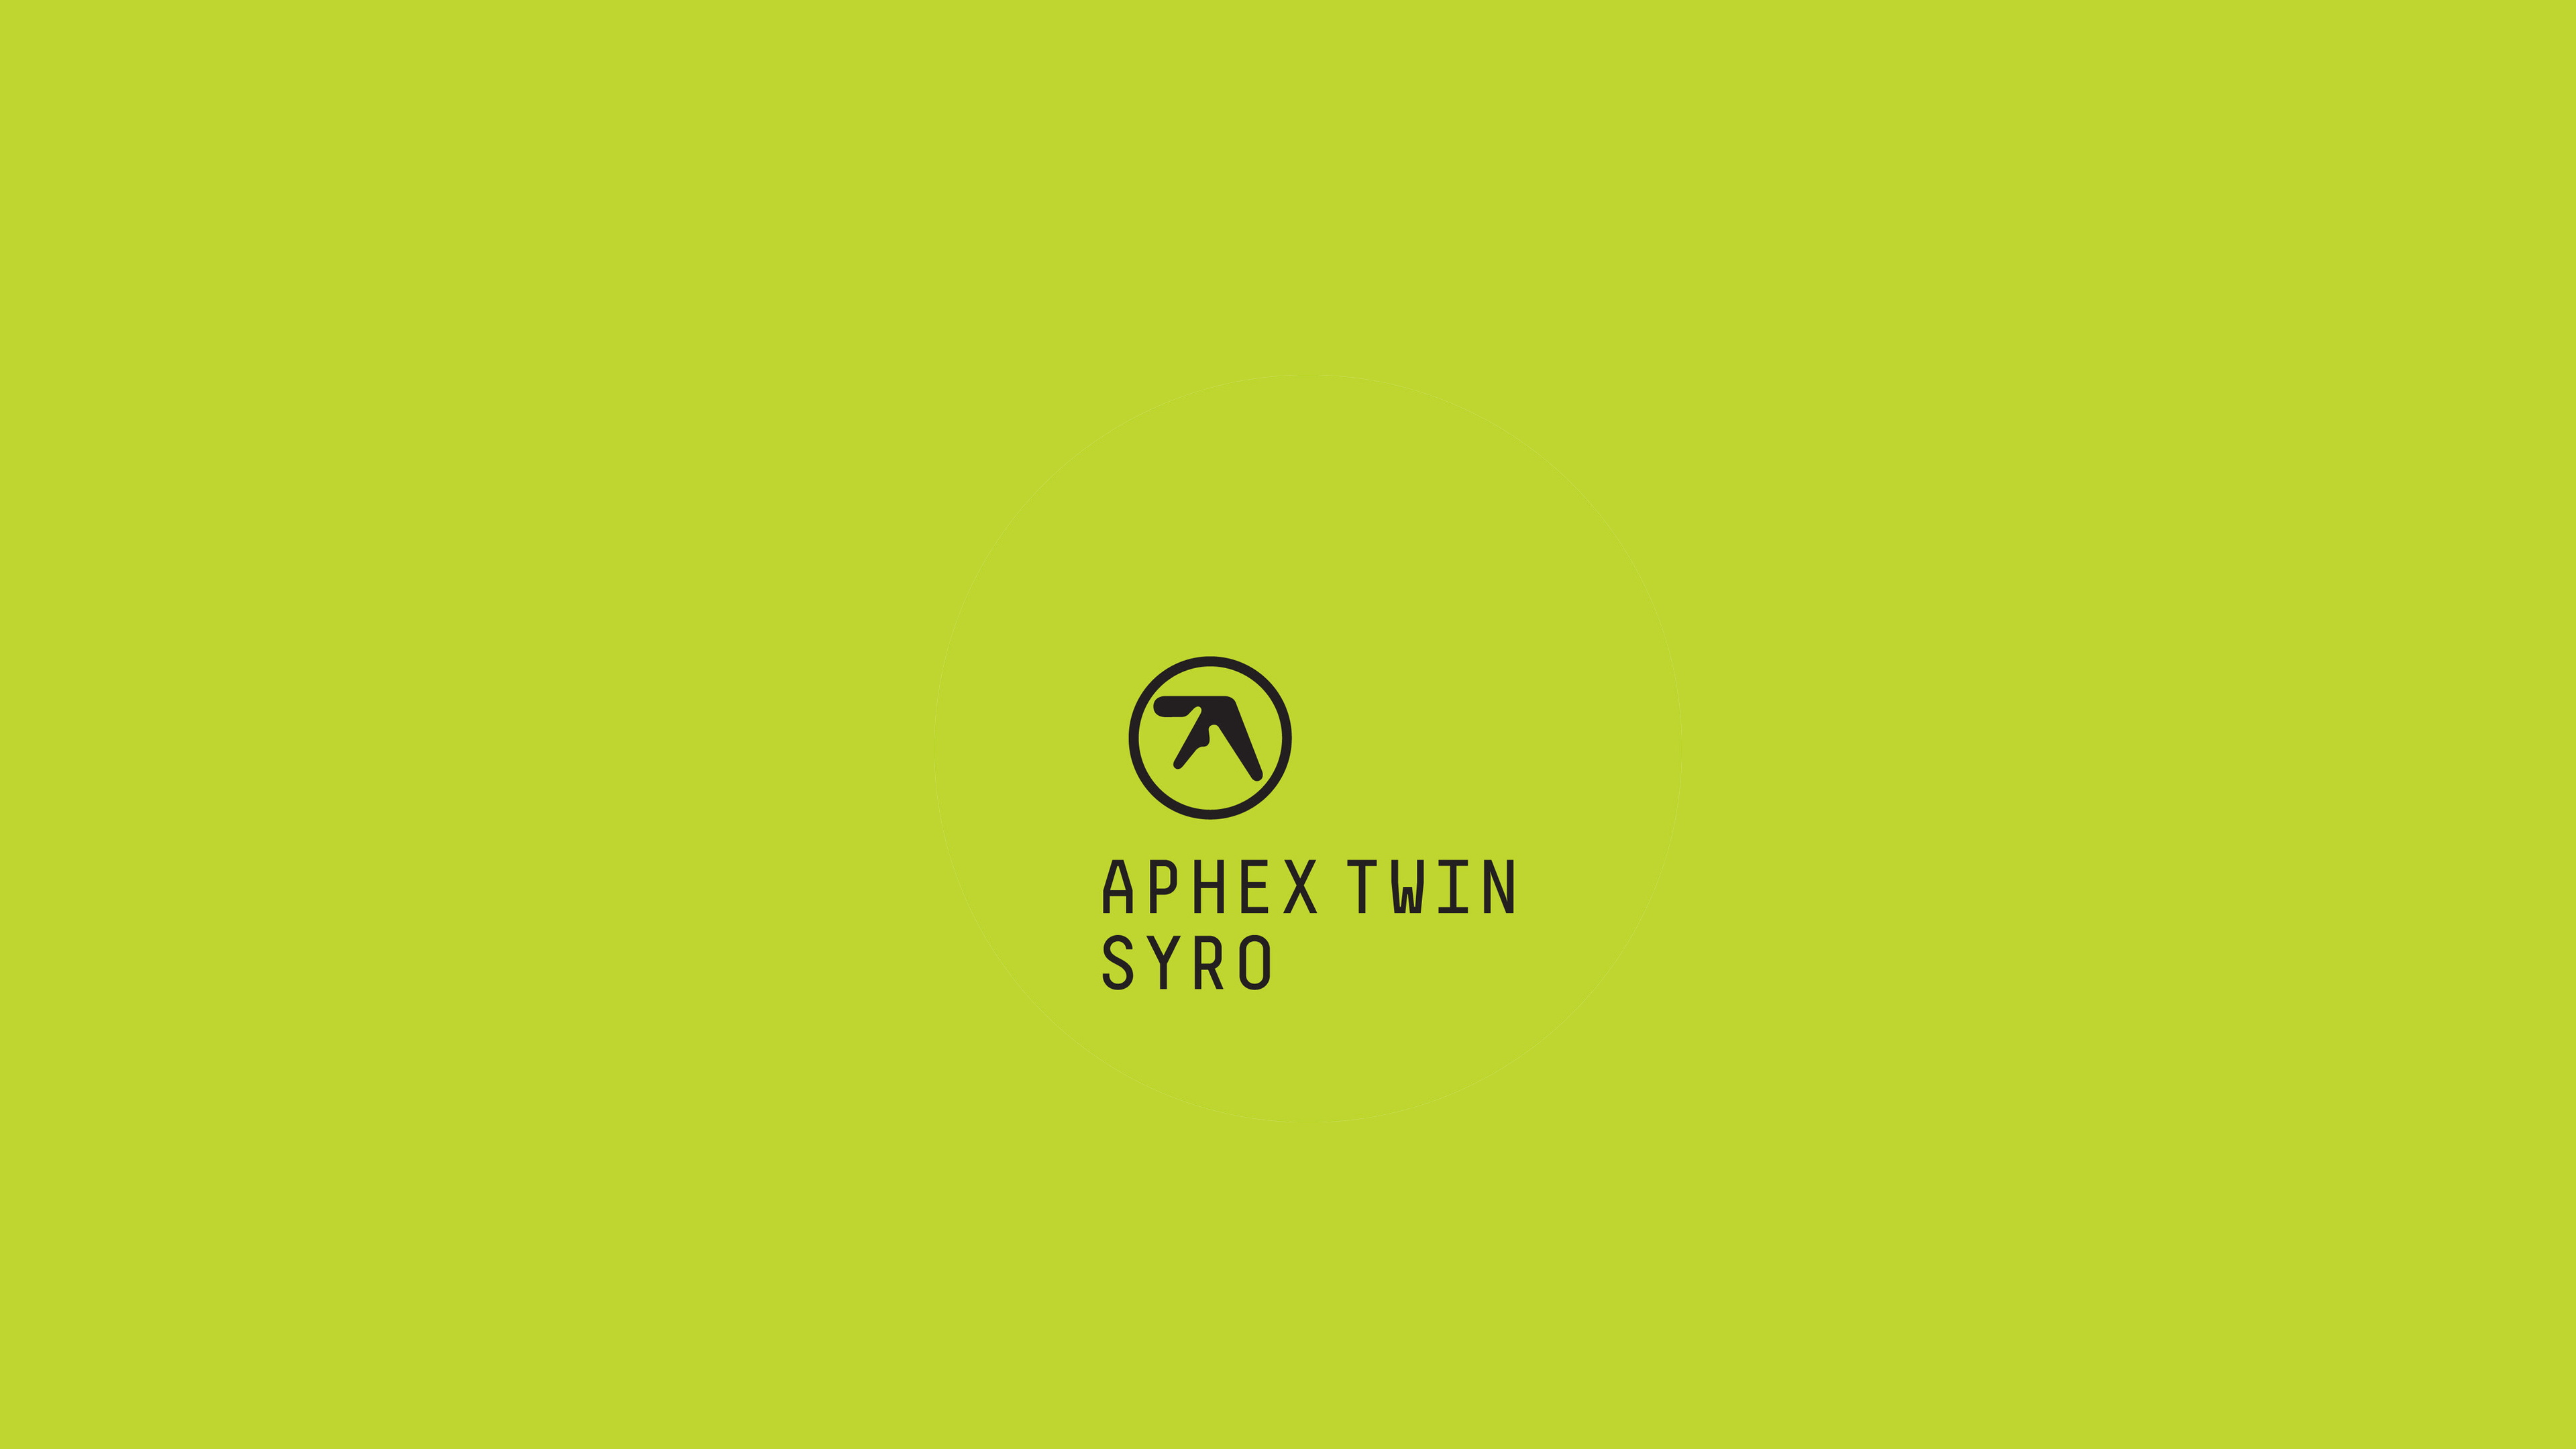 Any cool Aphex Twin wallpaper?